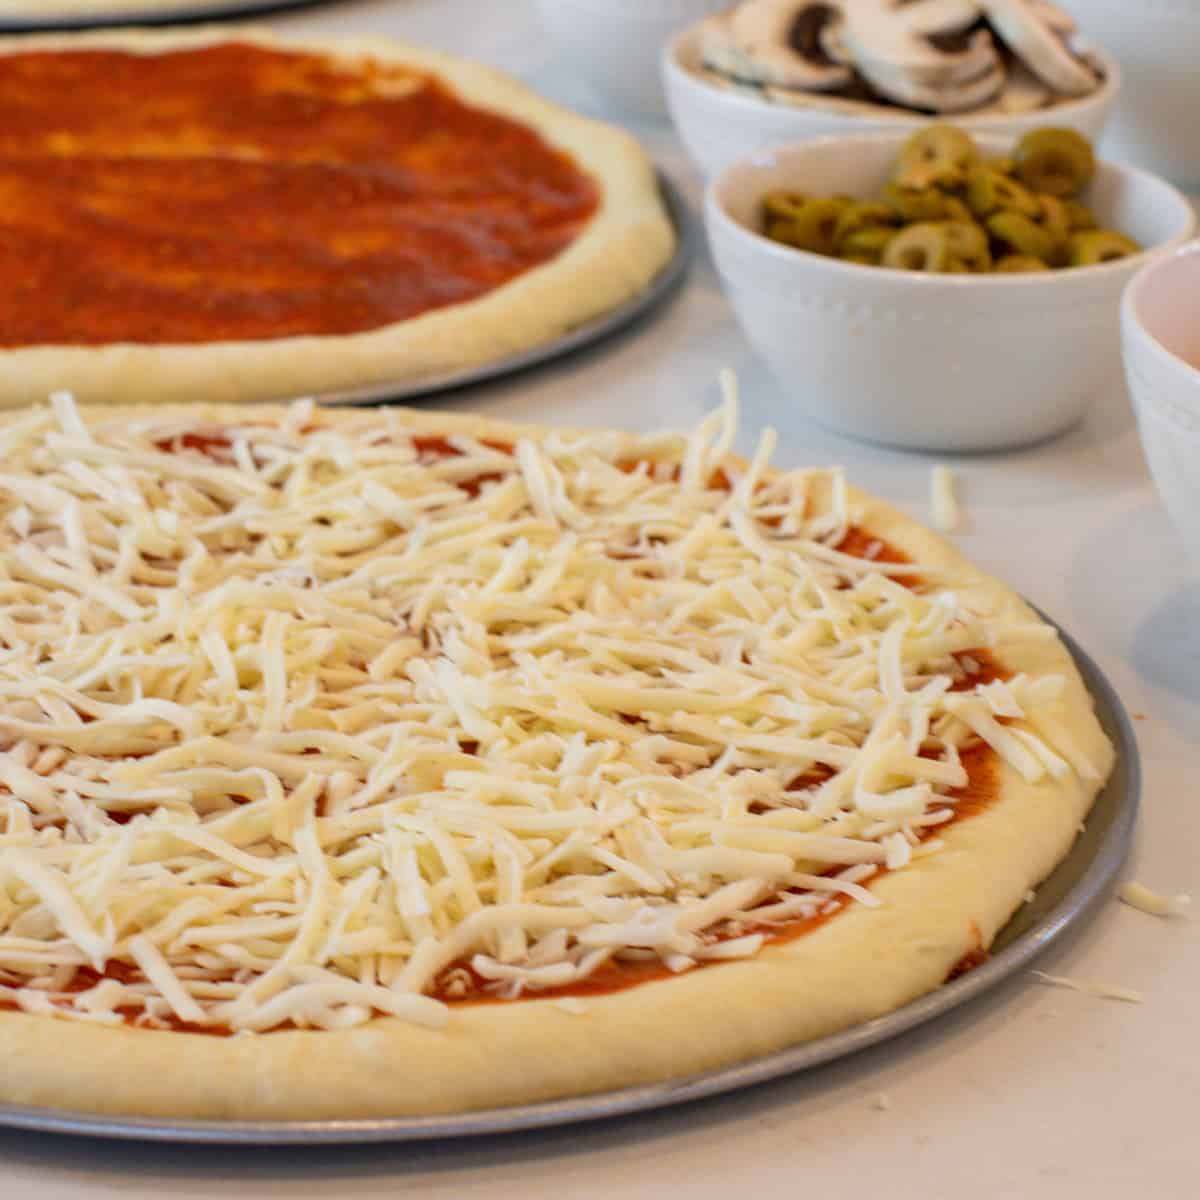 Sauce and cheese on a pizza crust.